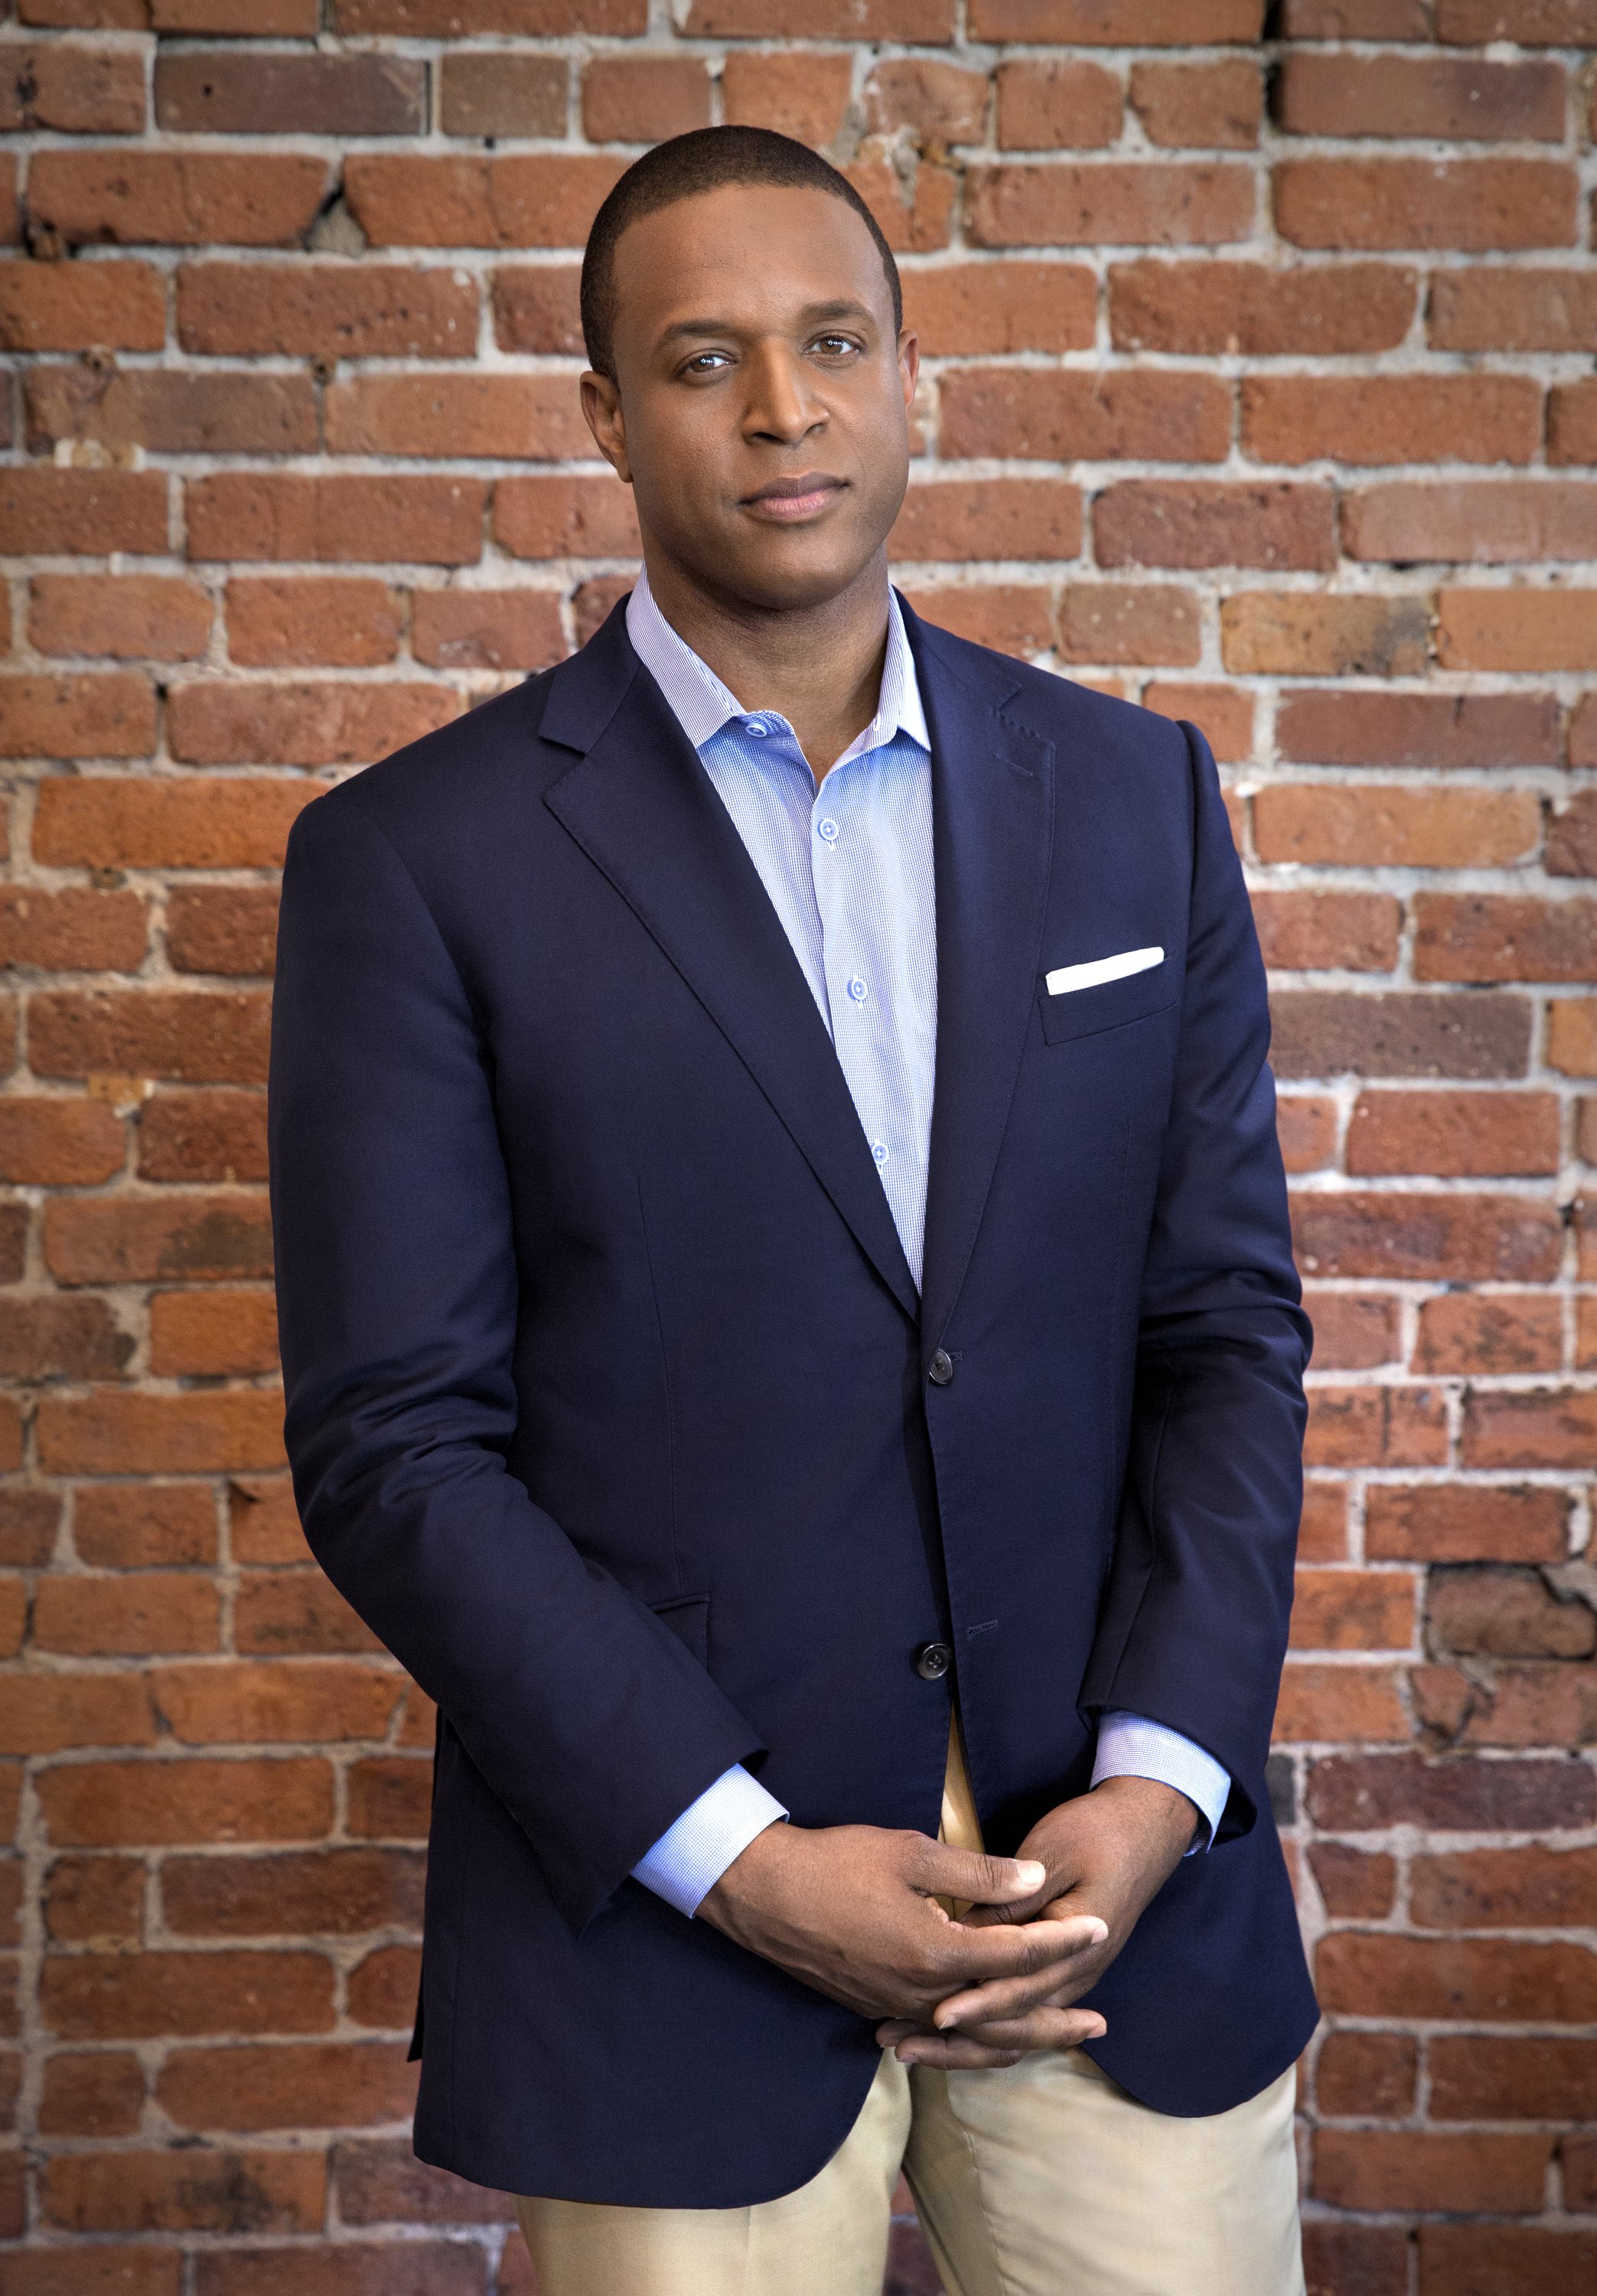 Craig Melvin photographed for season 1 of Dateline in 2017. | Source: Getty Images